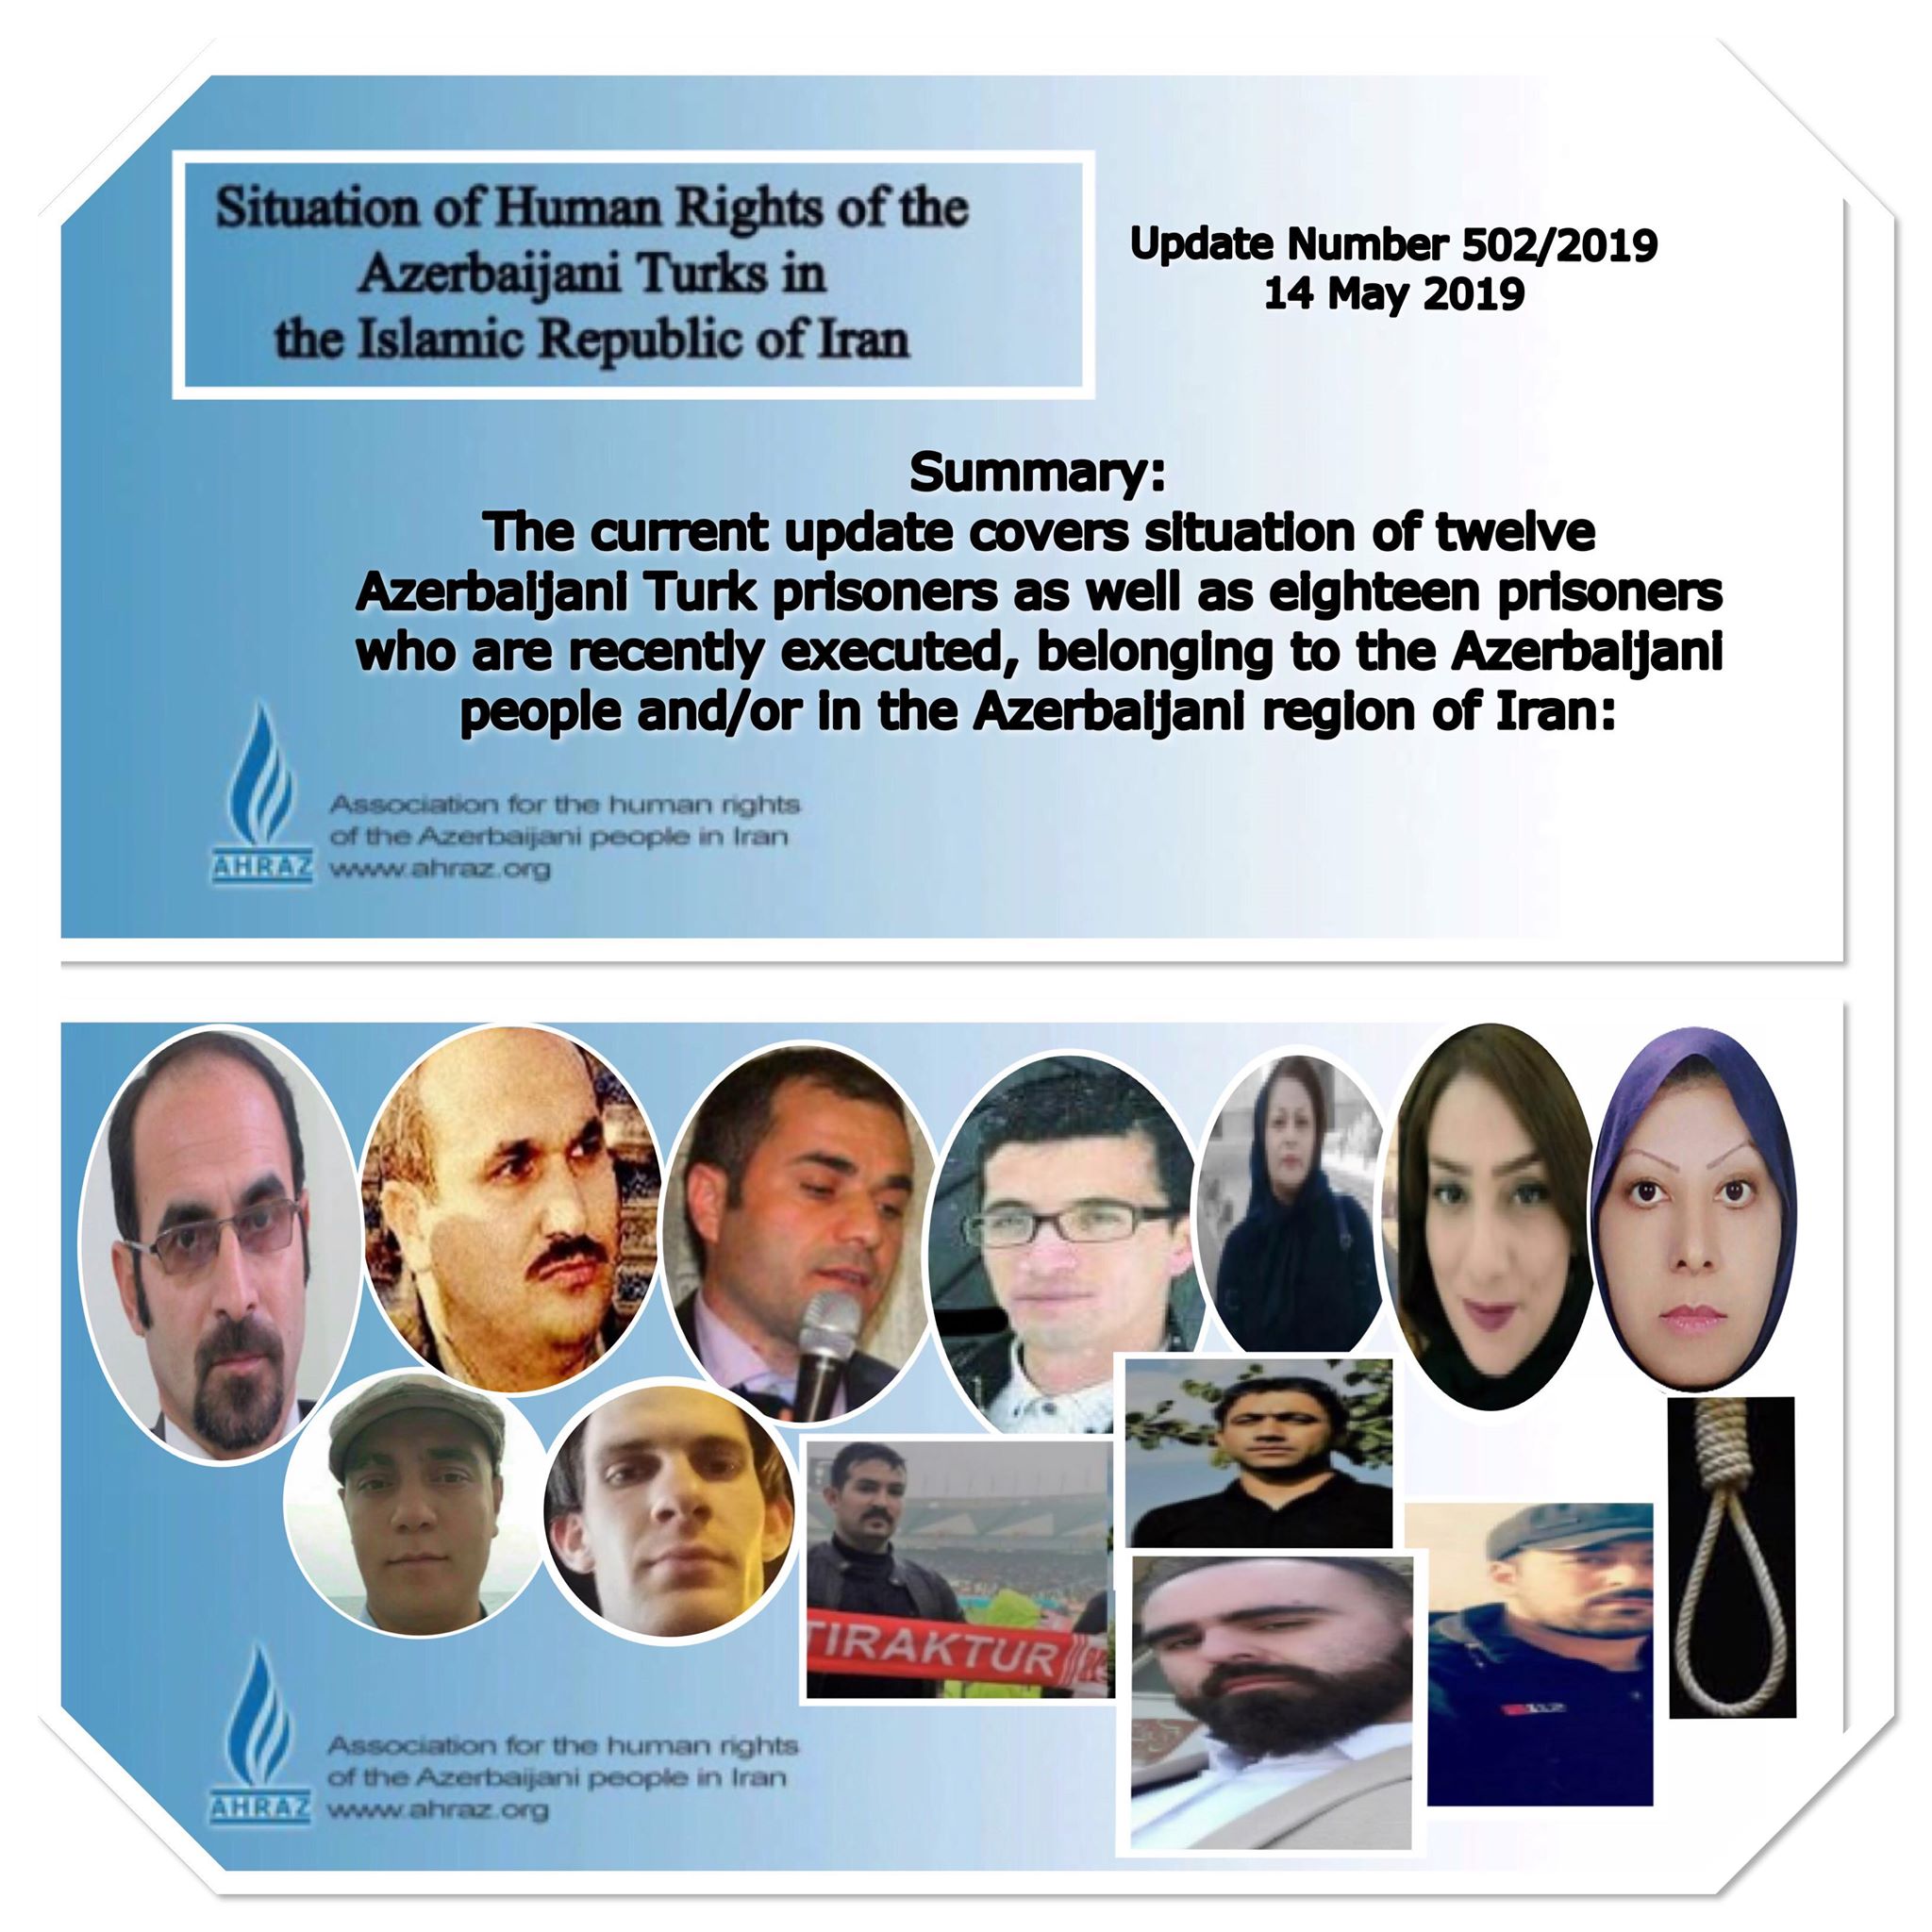 The Submission of Association for the Human Rights of the Azerbaijani People in Iran (AHRAZ) to theUN’s special rapporteur on human rights in Iran Mr. Javaid Rehman